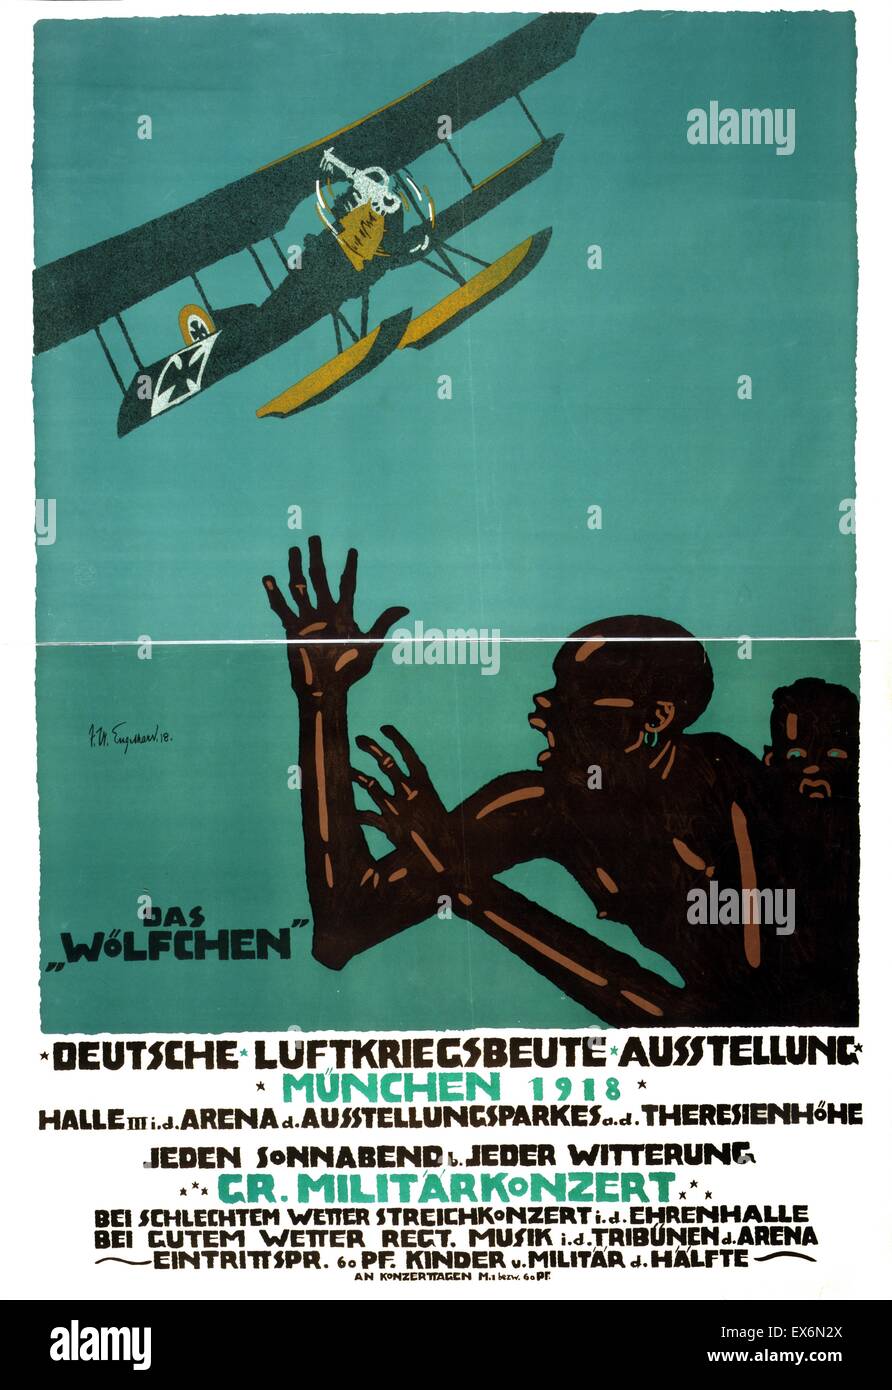 The poster depicts a German land/sea biplane, the 'Wolfschen', flying over Africans who are cowering in fear. The text provides information about an exhibition in Munich of captured war items. Dated 1918 Stock Photo